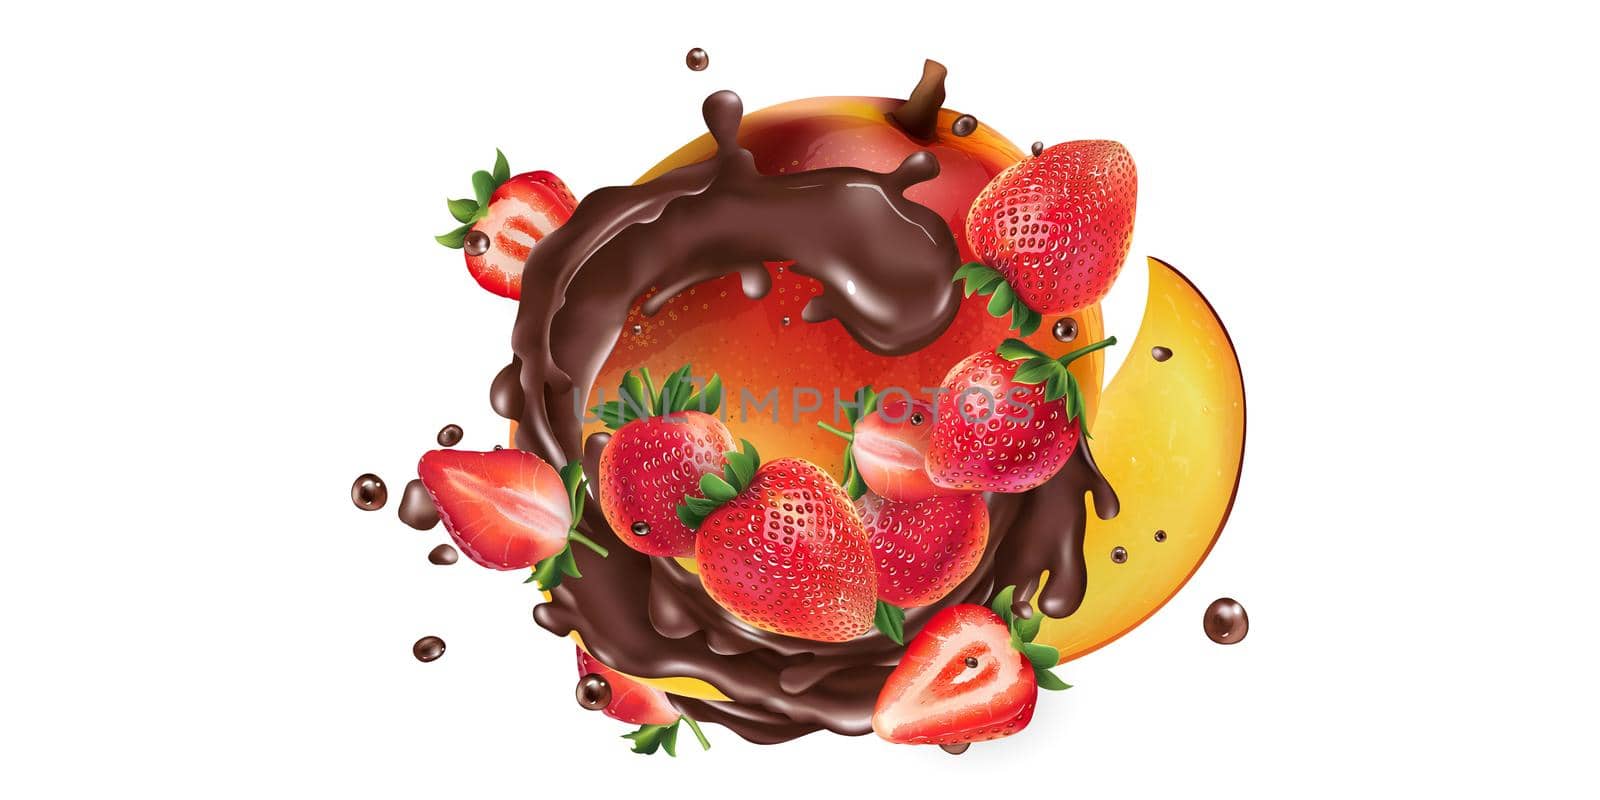 Fresh mango with strawberries in chocolate splashes on a white background. Realistic style illustration.